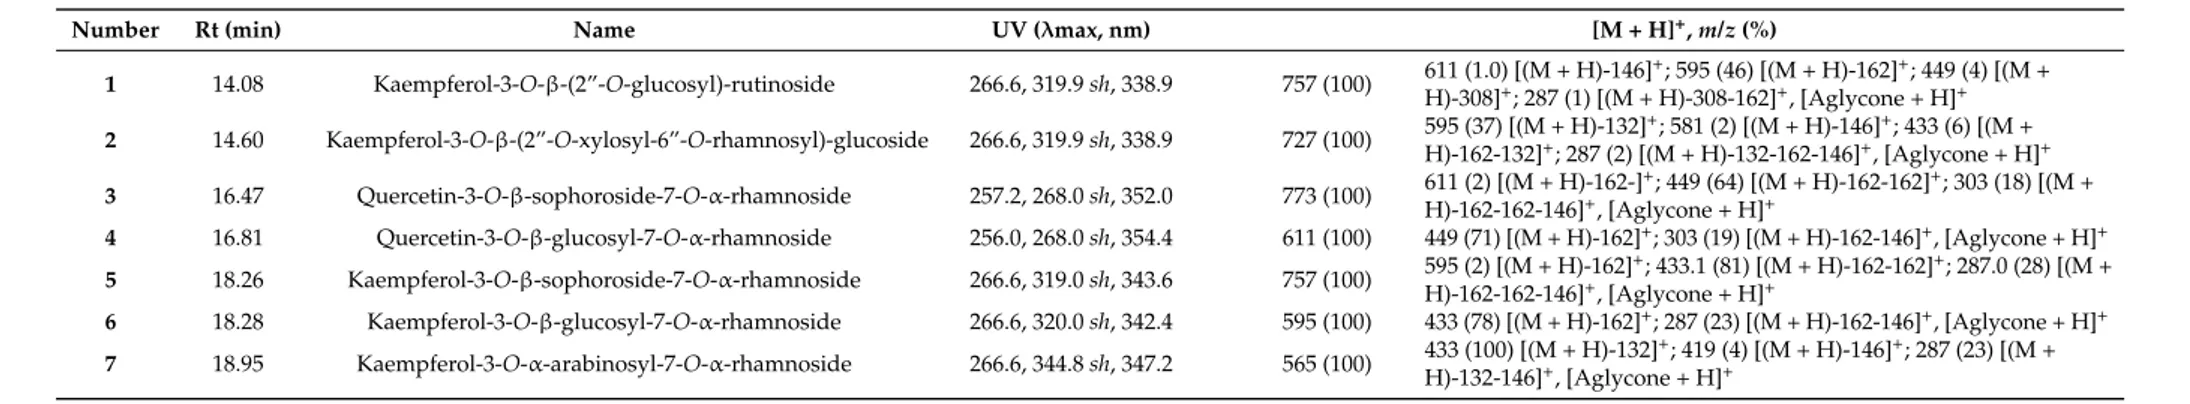 Table 2. Analytical data of phenolic compounds identified in the crude MeOH extract of M